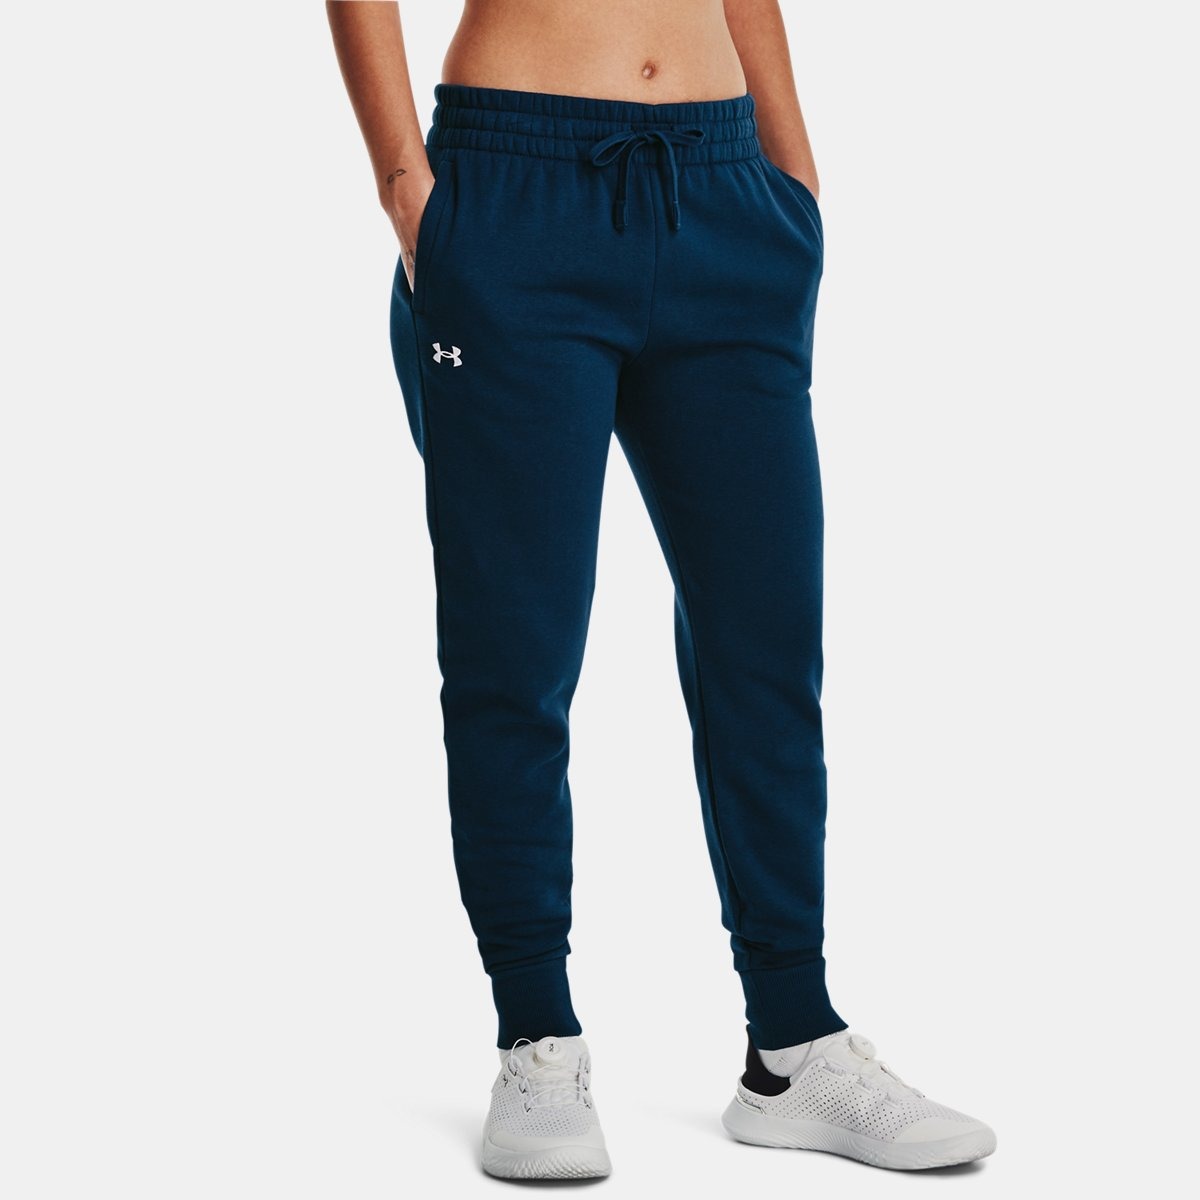 Blue Joggers for Woman at Under Armour GOOFASH